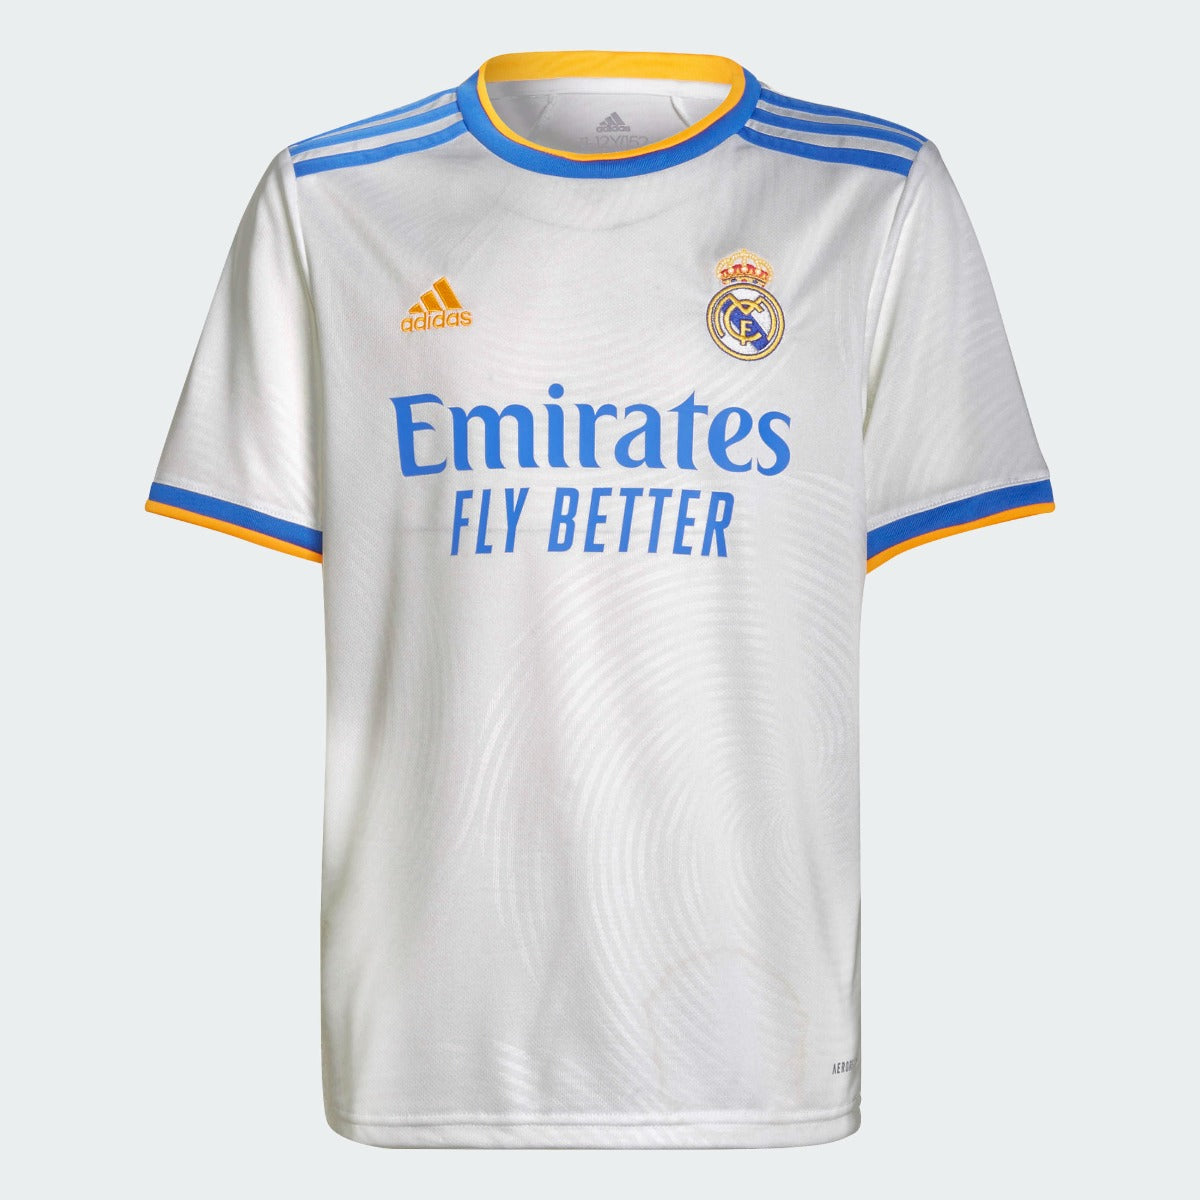 Adidas 2021-22 Real Madrid Youth Home Jersey - White-Blue-Orange (Front)